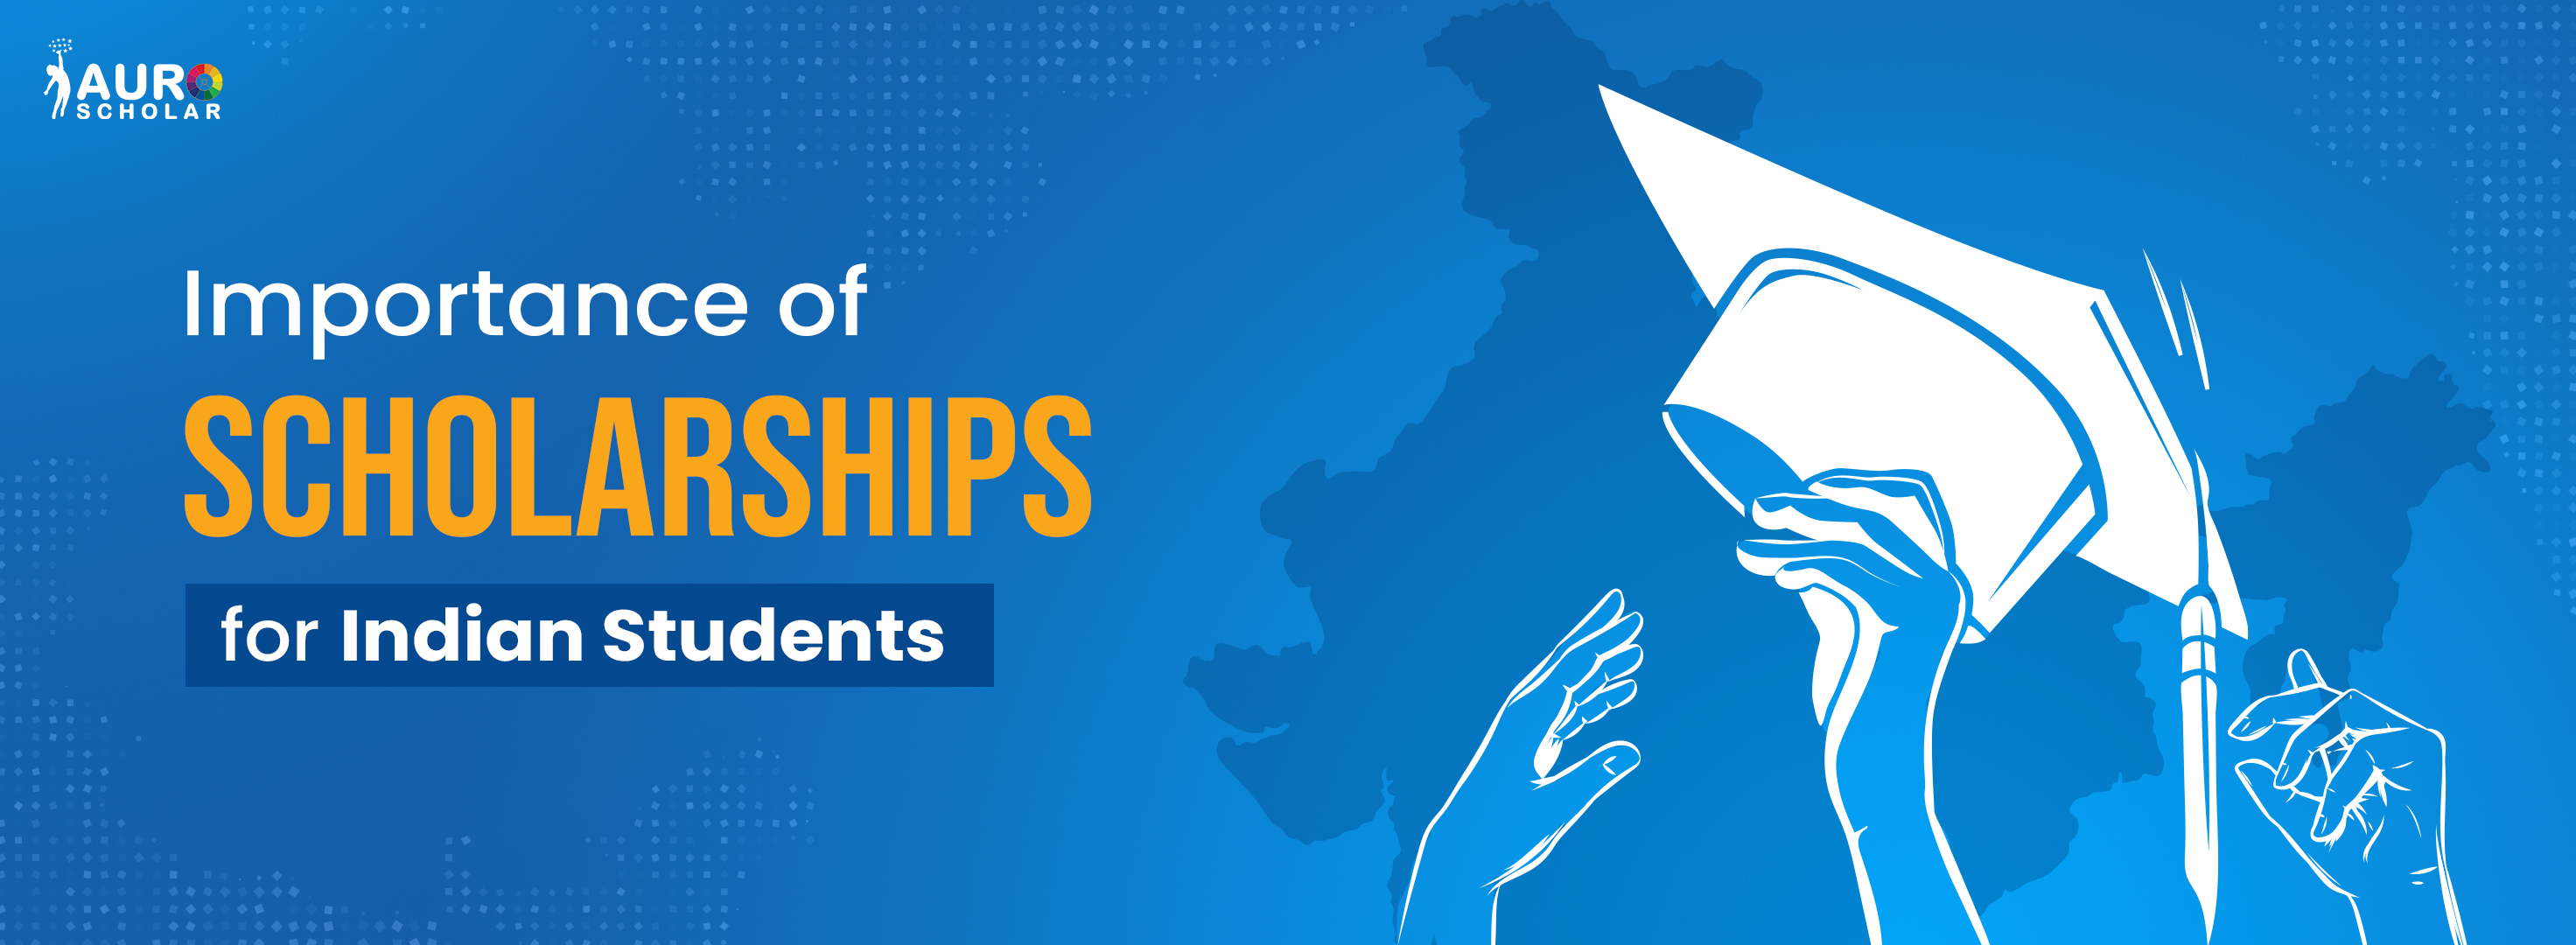 scholarships for Indian students